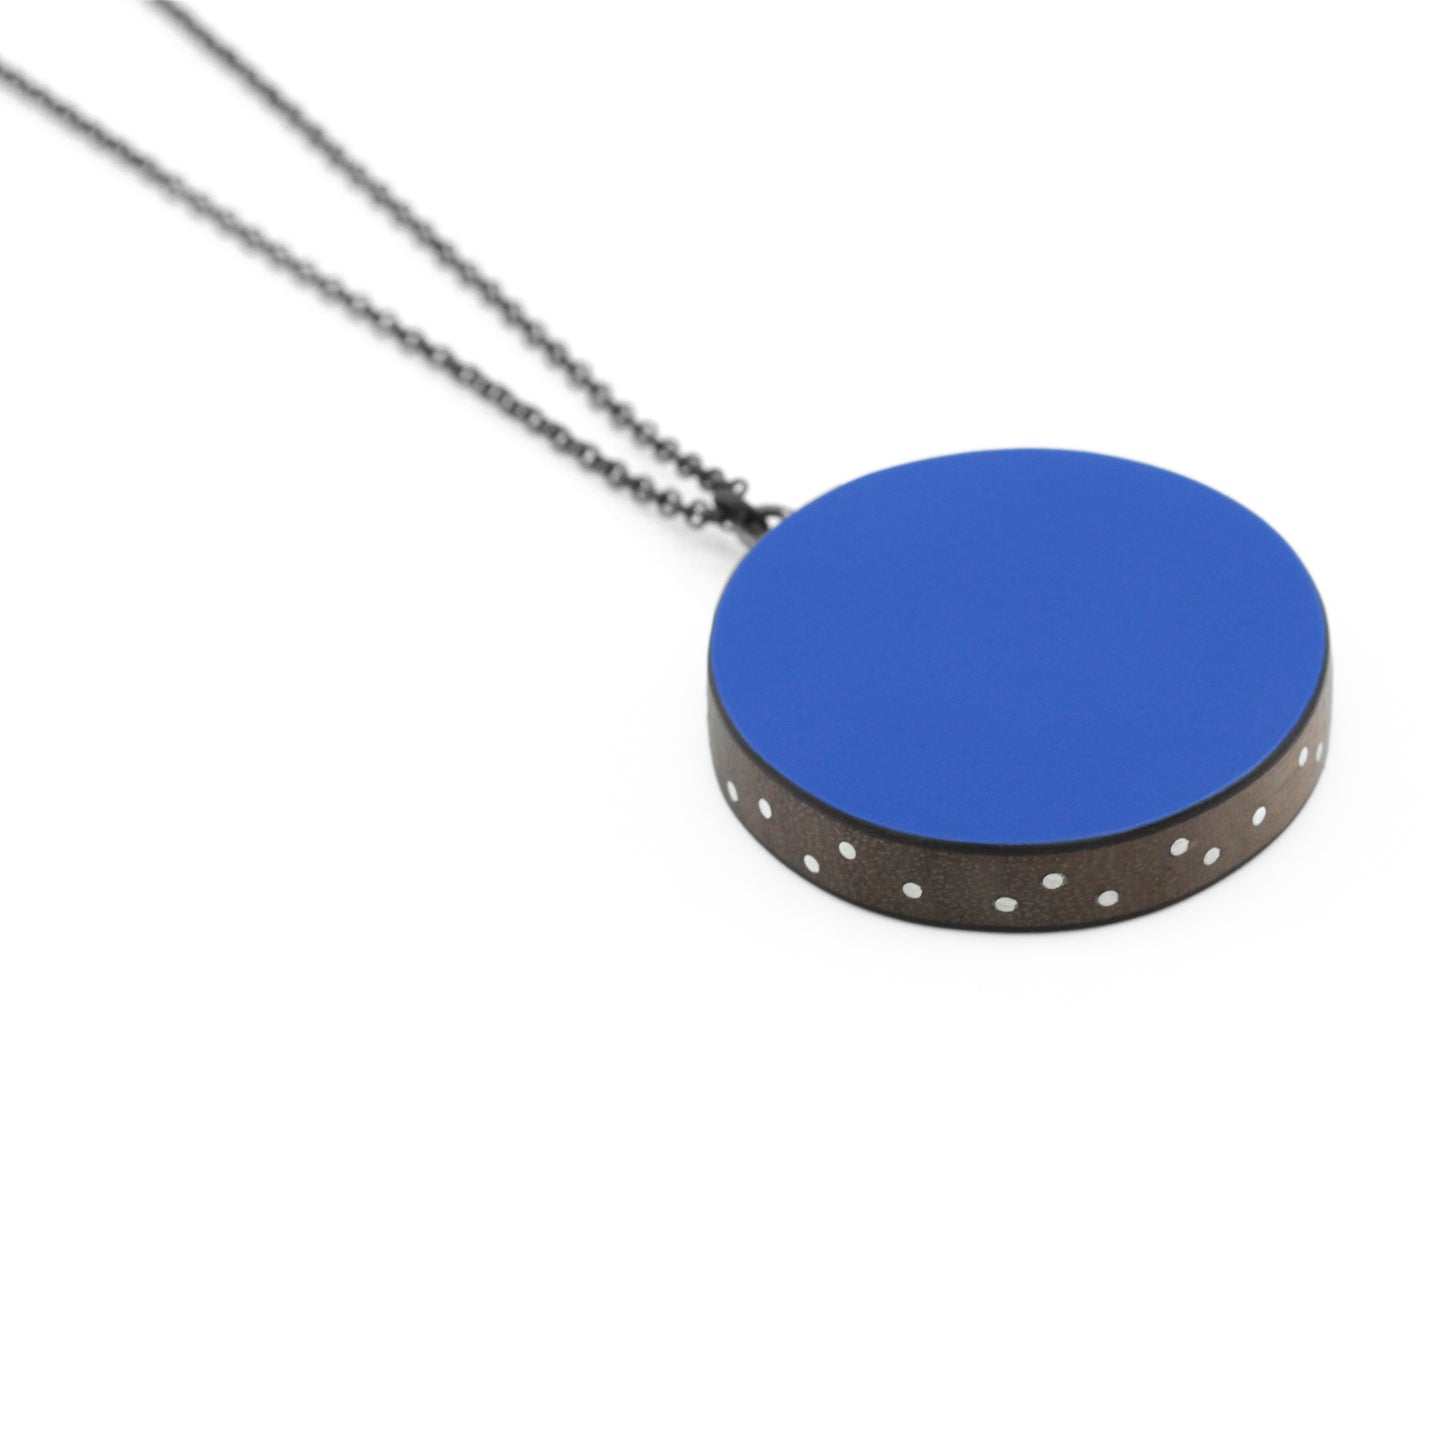 Two Sided Blue Pendant